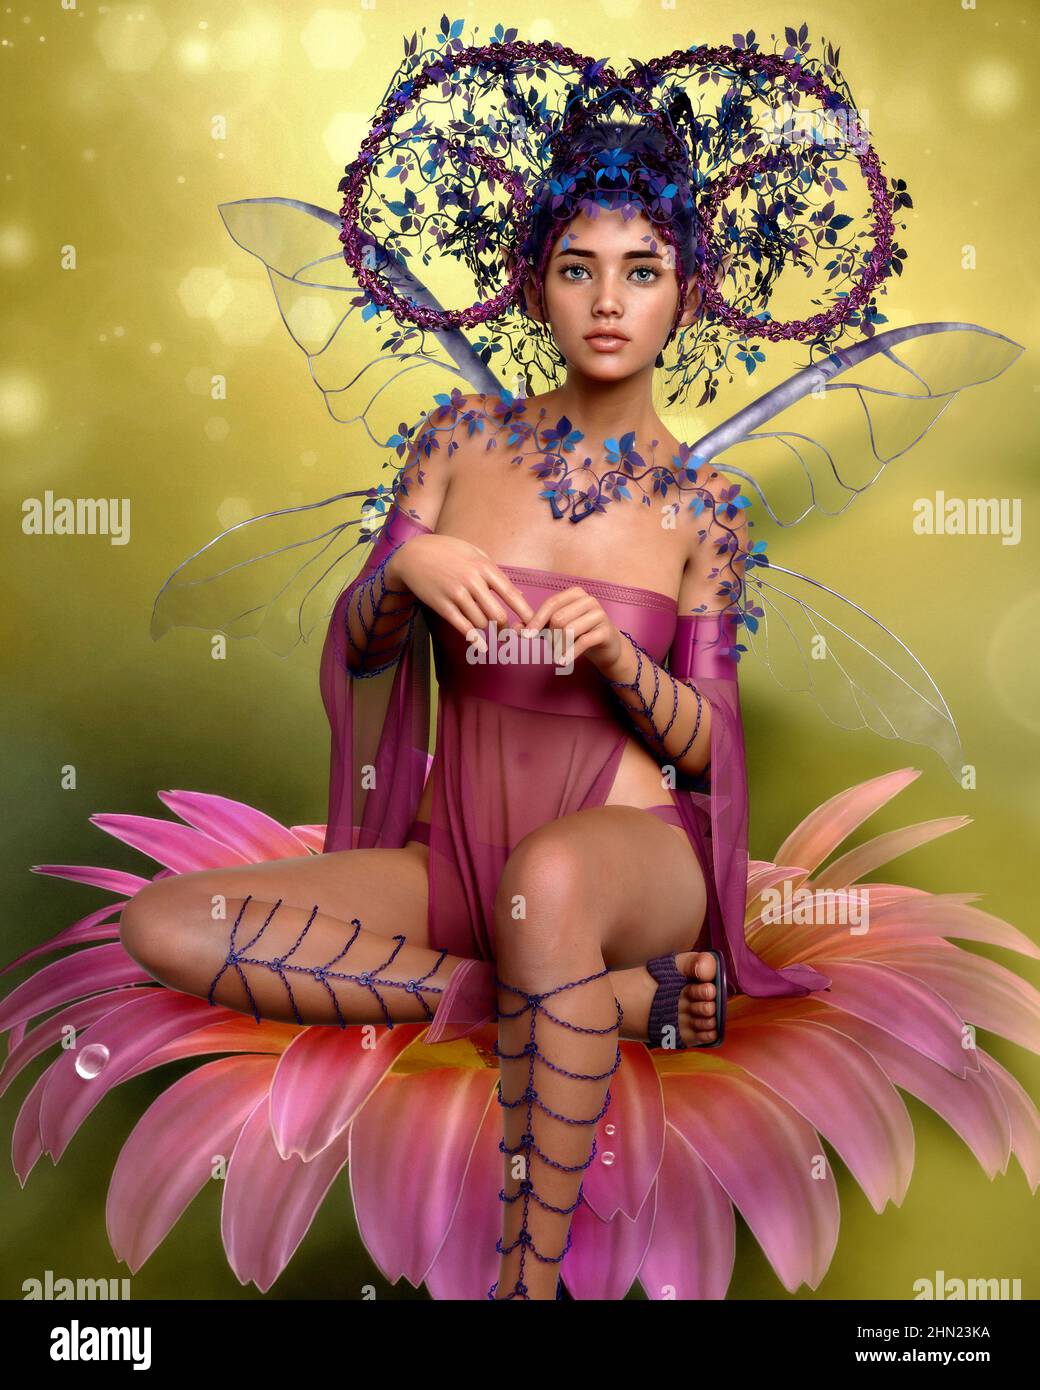 3d computer graphics of a fairy with fantasy headdress and wings Stock Photo